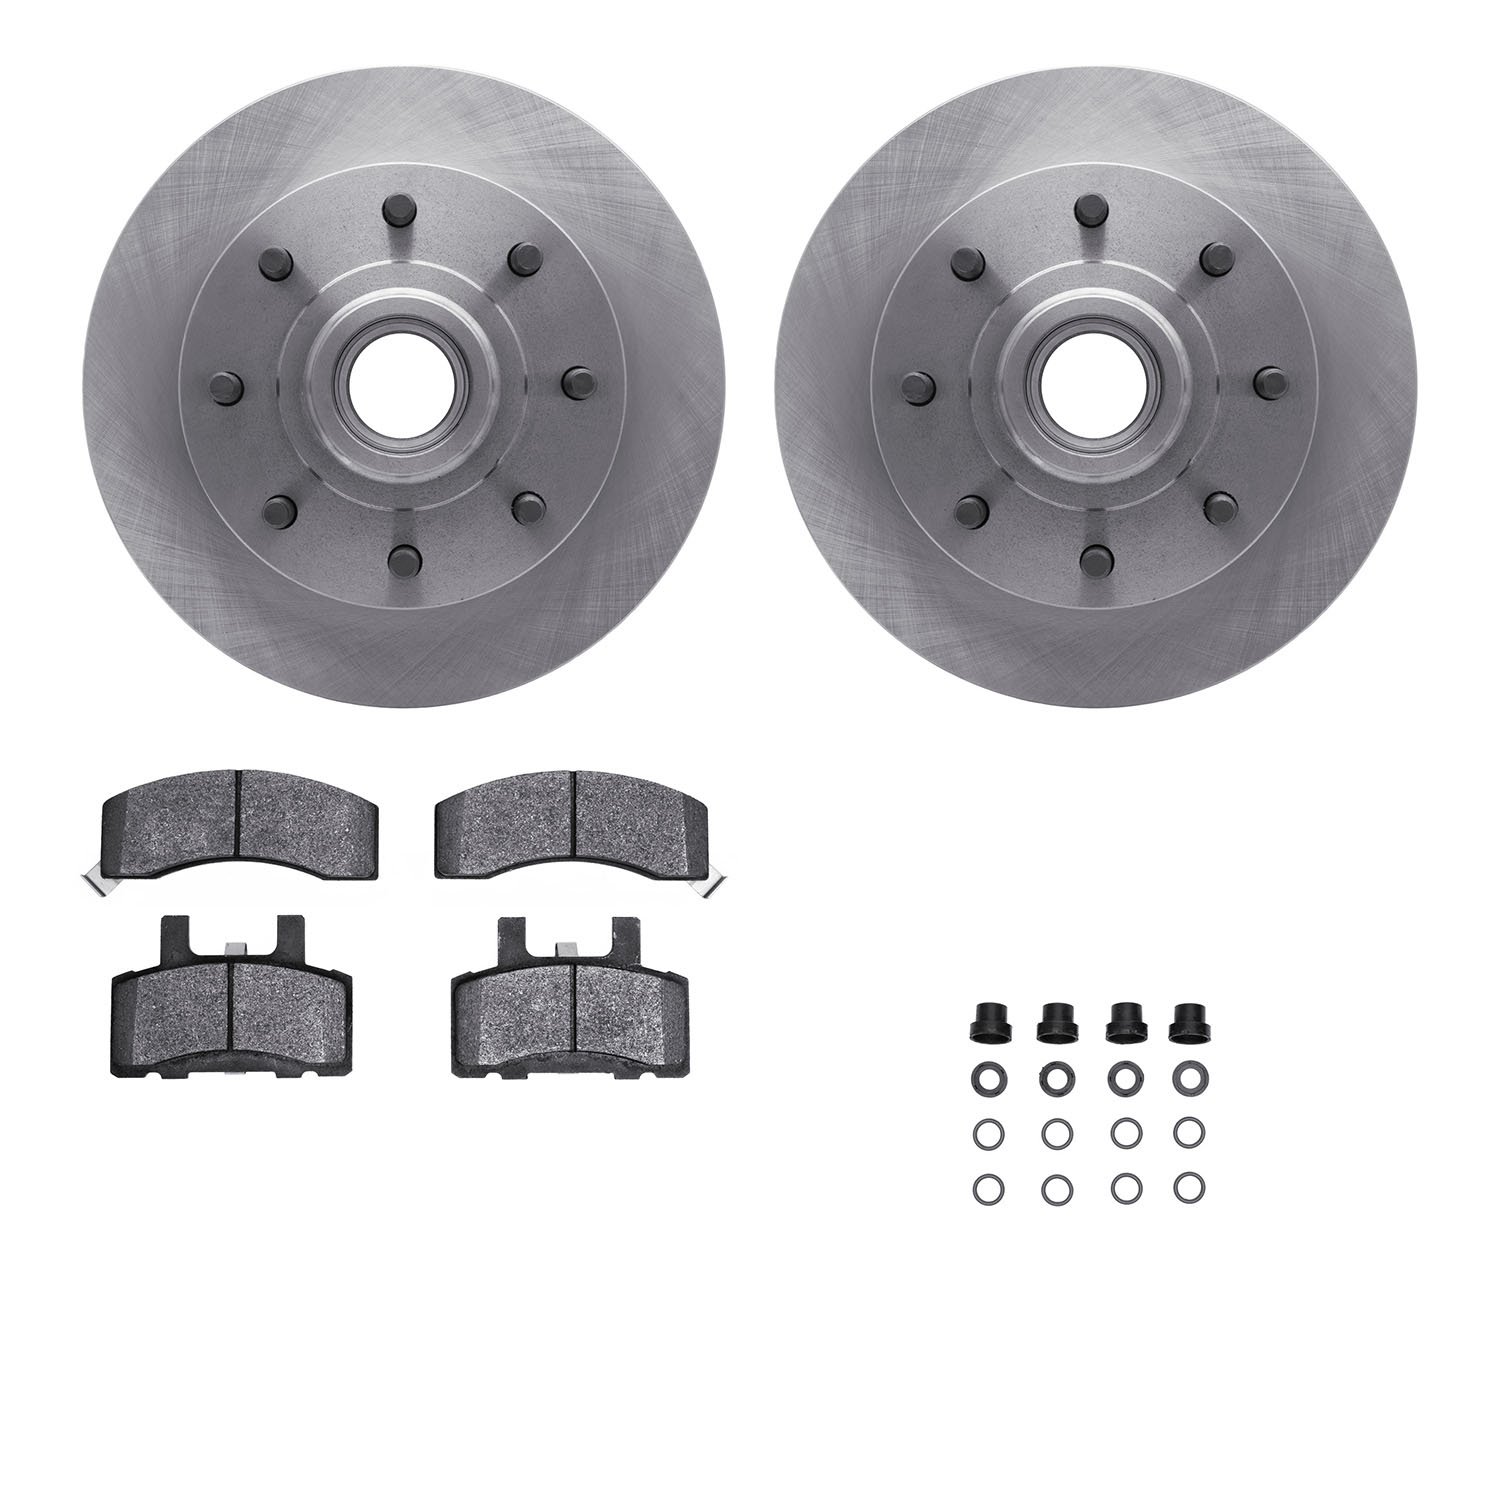 6412-48022 Brake Rotors with Ultimate-Duty Brake Pads Kit & Hardware, 1988-1996 GM, Position: Front